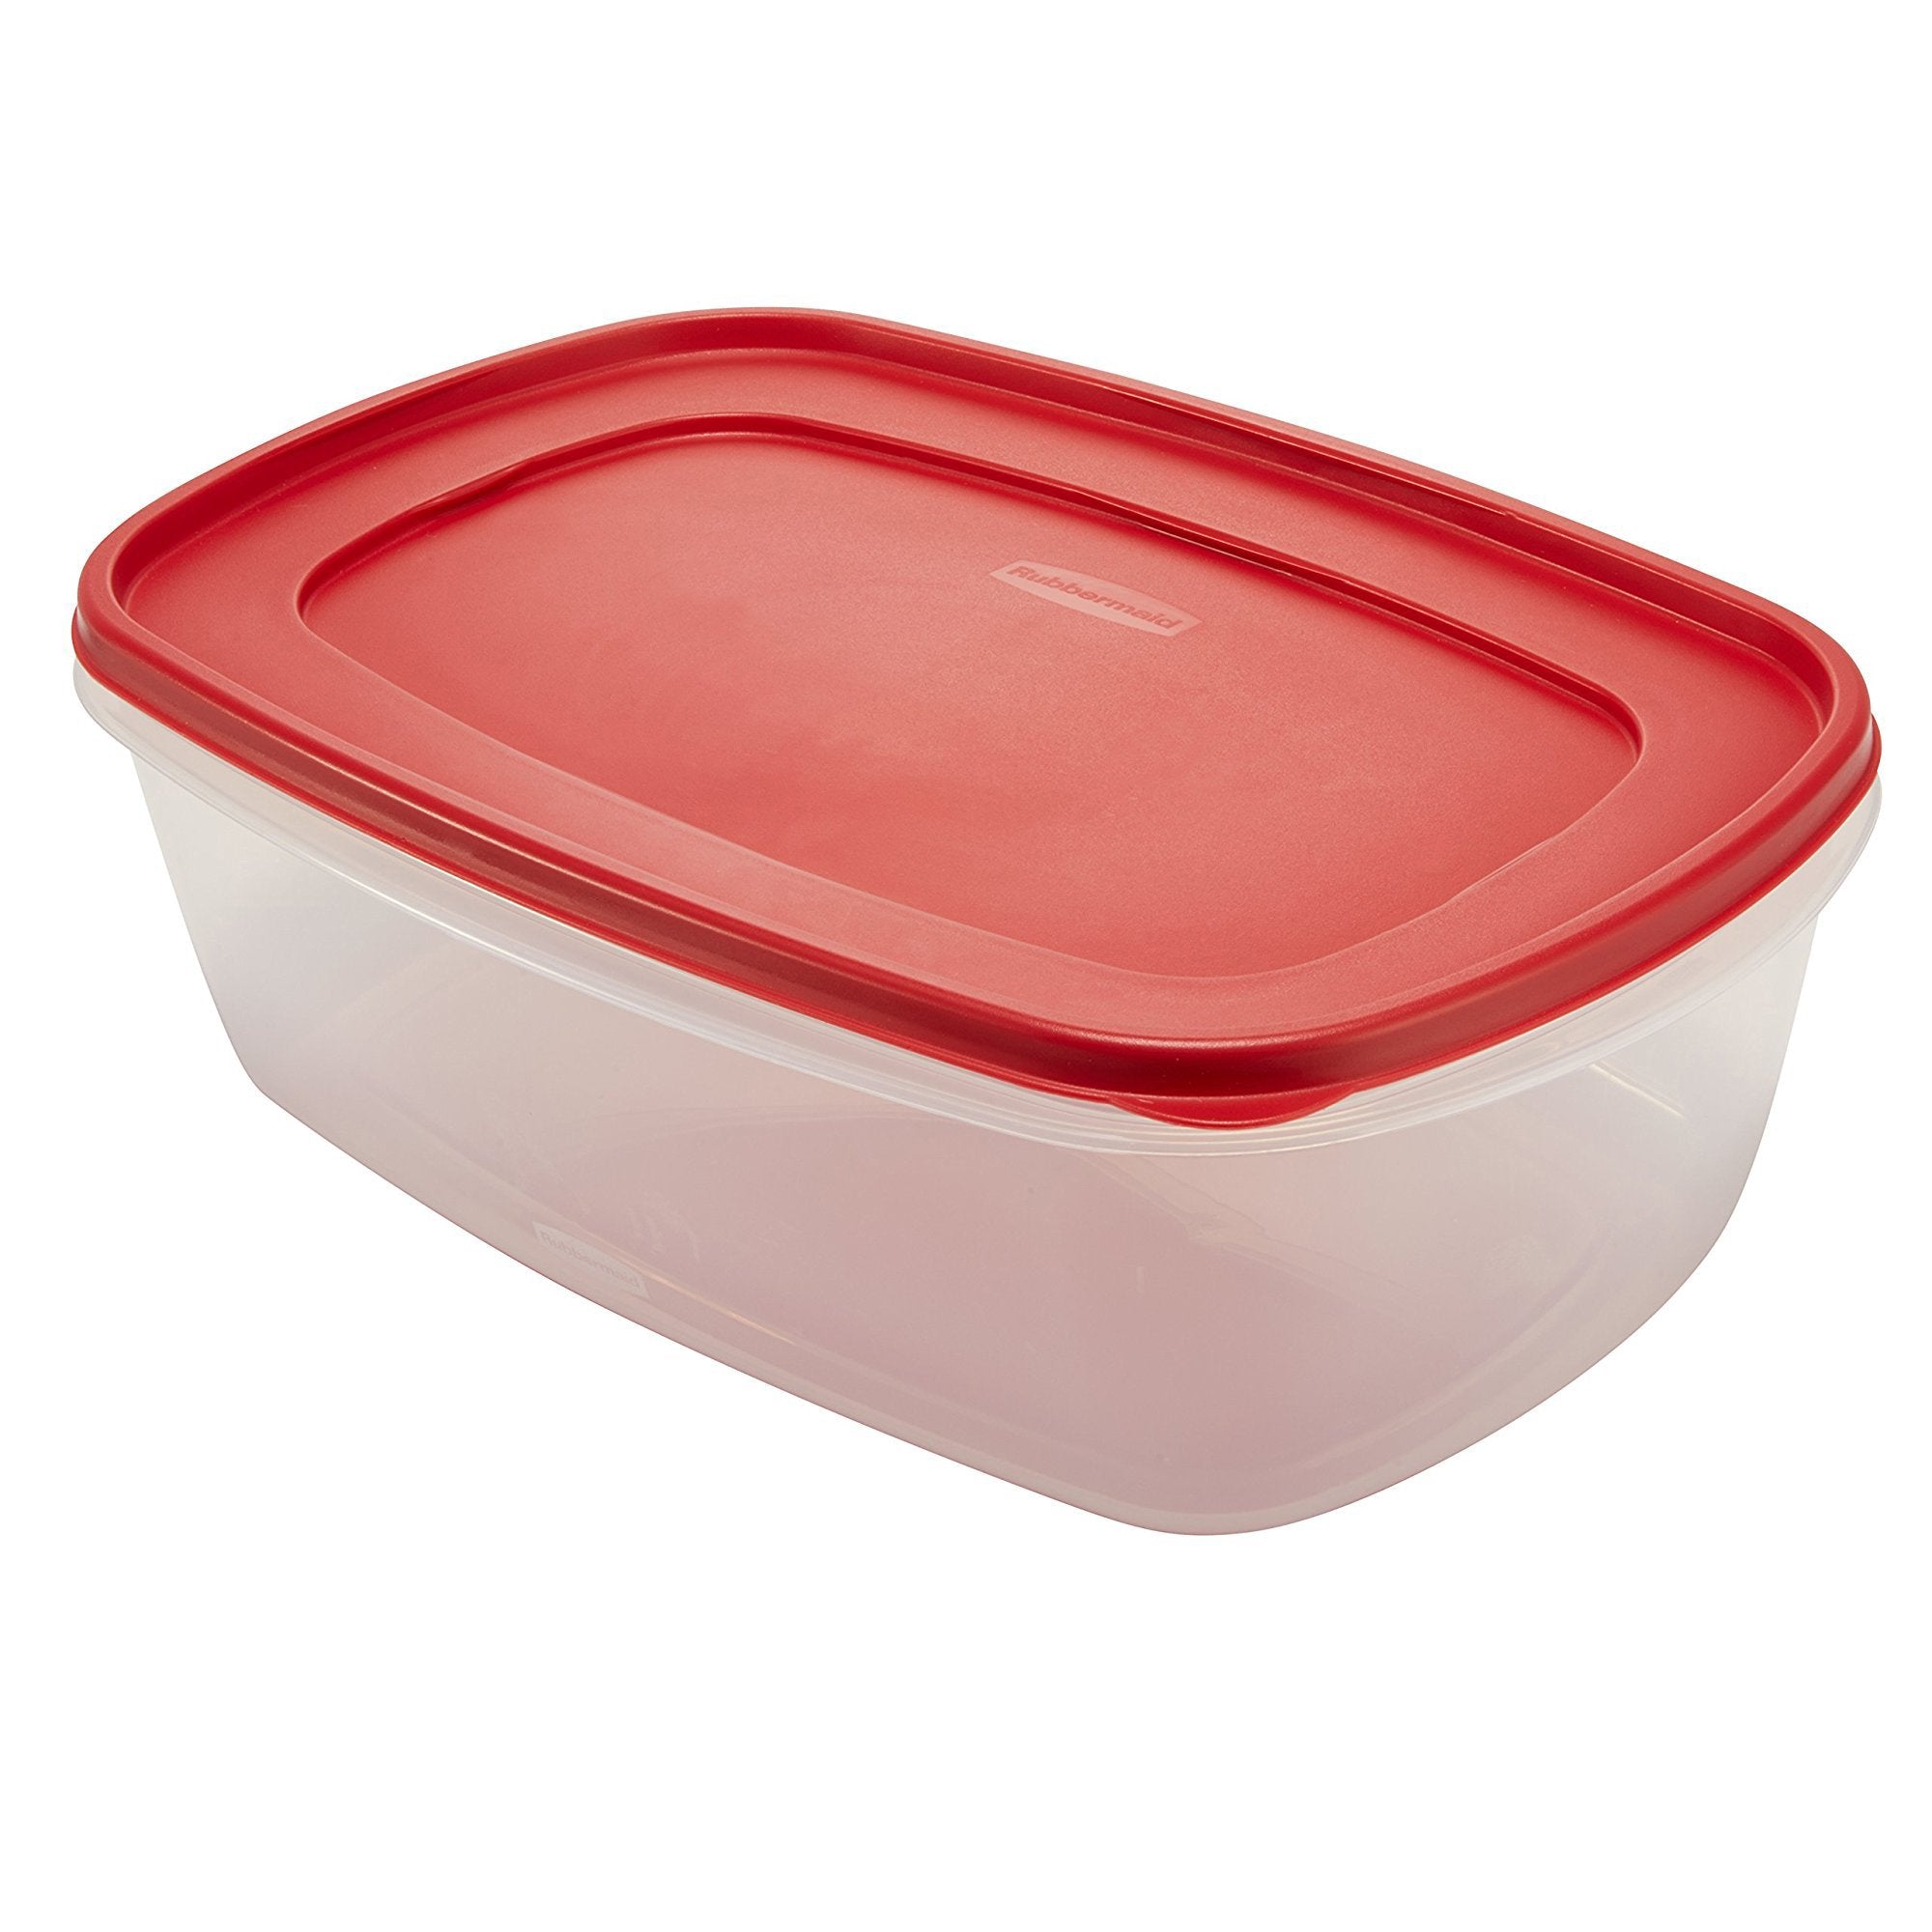 Rubbermaid EasyFindLids Food Storage Container, 9.4 L - Whole and All